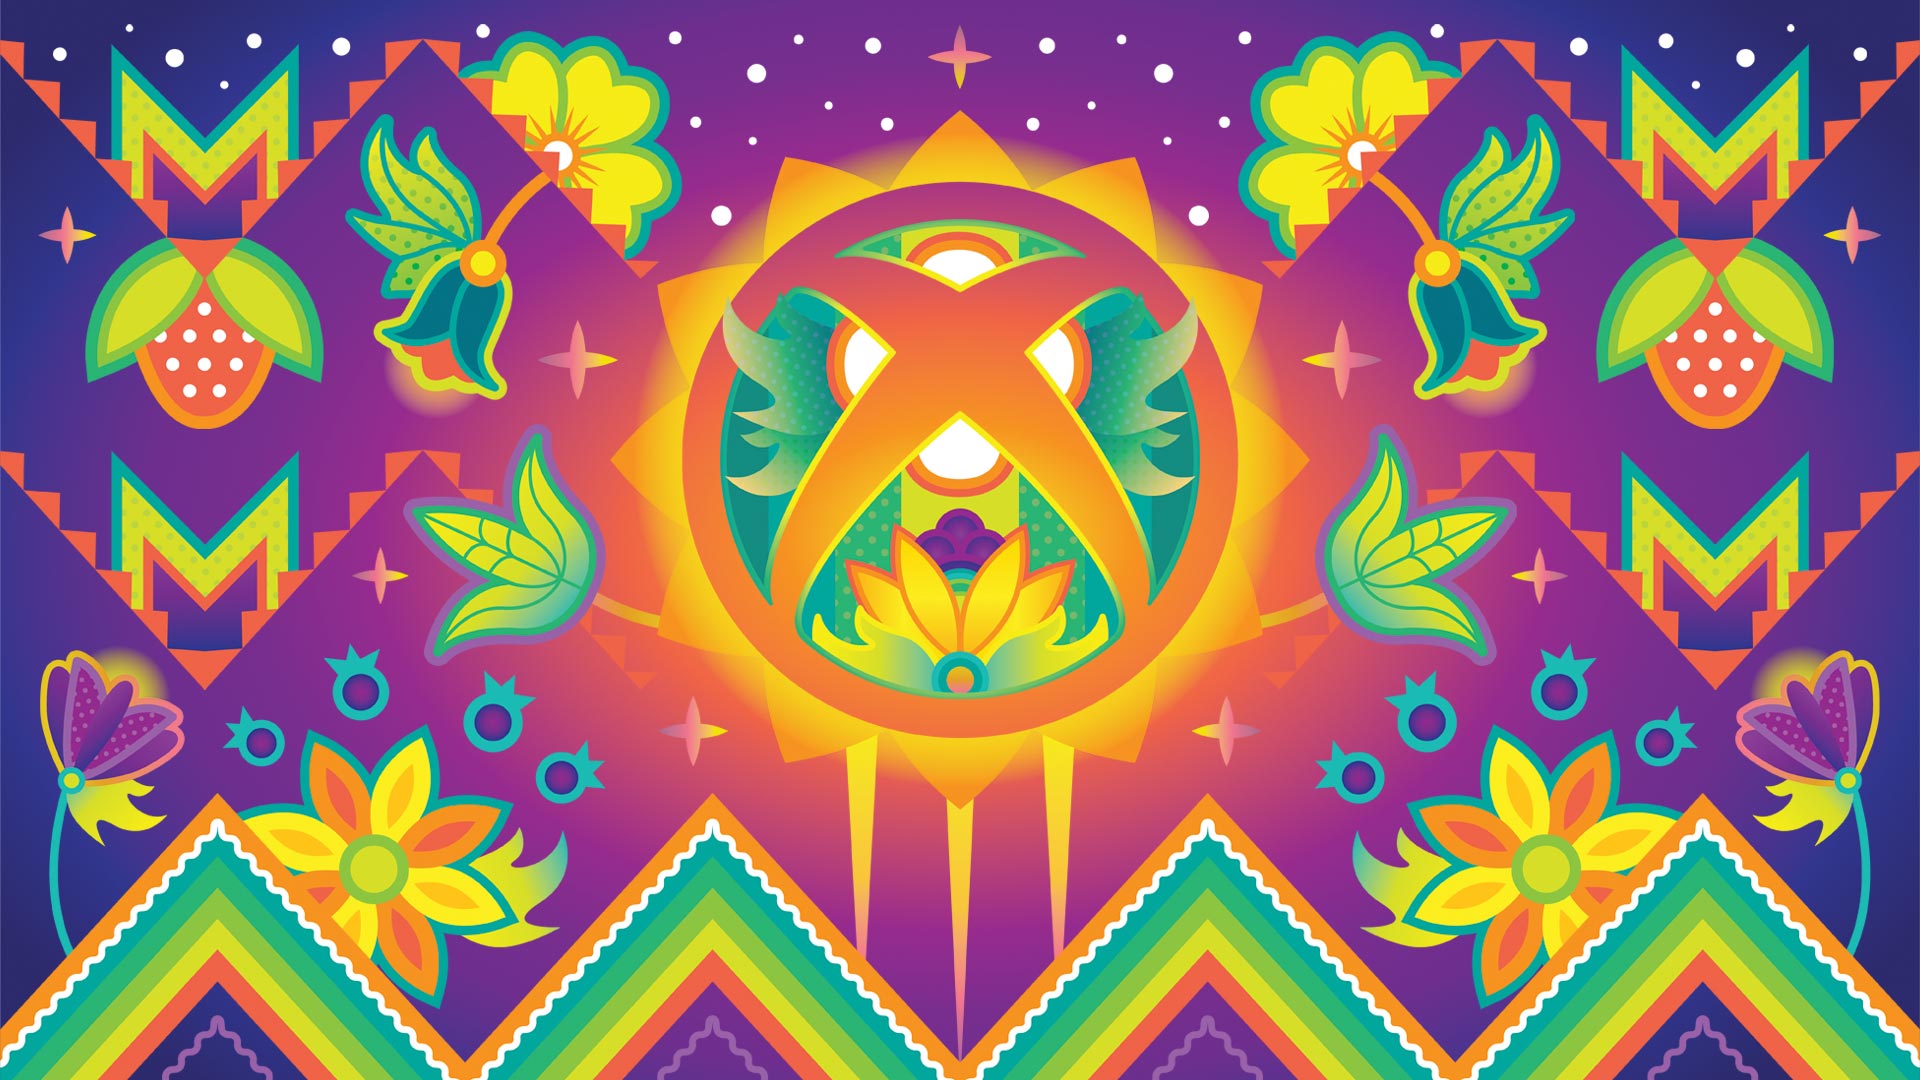 Chippewa Cree stylized Xbox logo with green, orange, and yellow flowers centered on the sun featuring a purple background with berries and colorful ribbons.